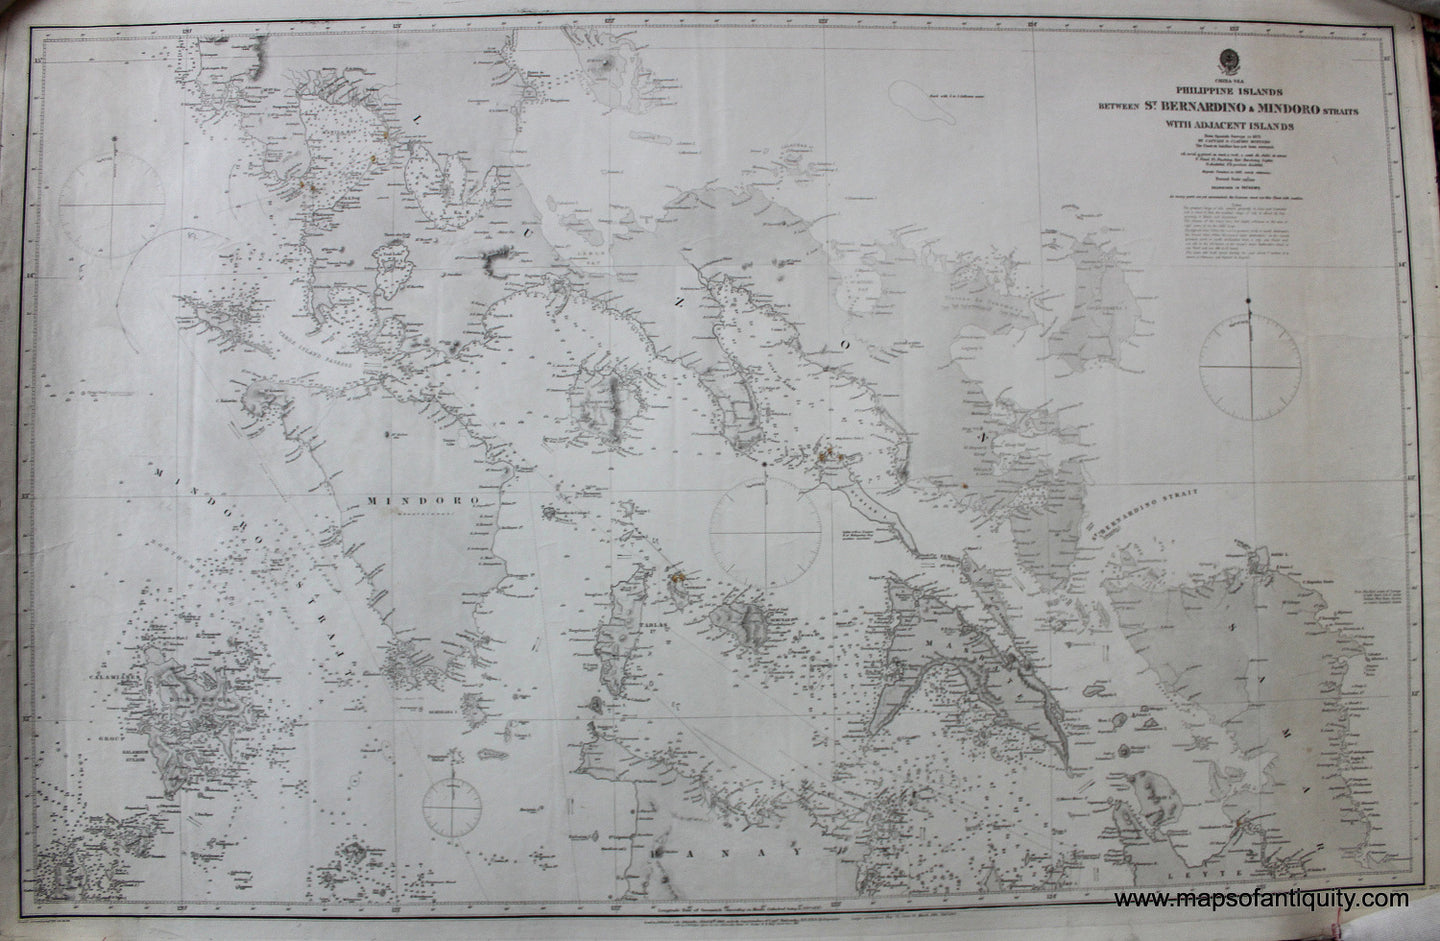 Black-and-White-Nautical-Chart-Philippine-Islands-Between-St-Bernardino-and-Mindoro-Straits-with-Adjacent-Islands--****-Pacific-Philippines-1887-British-Admiralty-Maps-Of-Antiquity